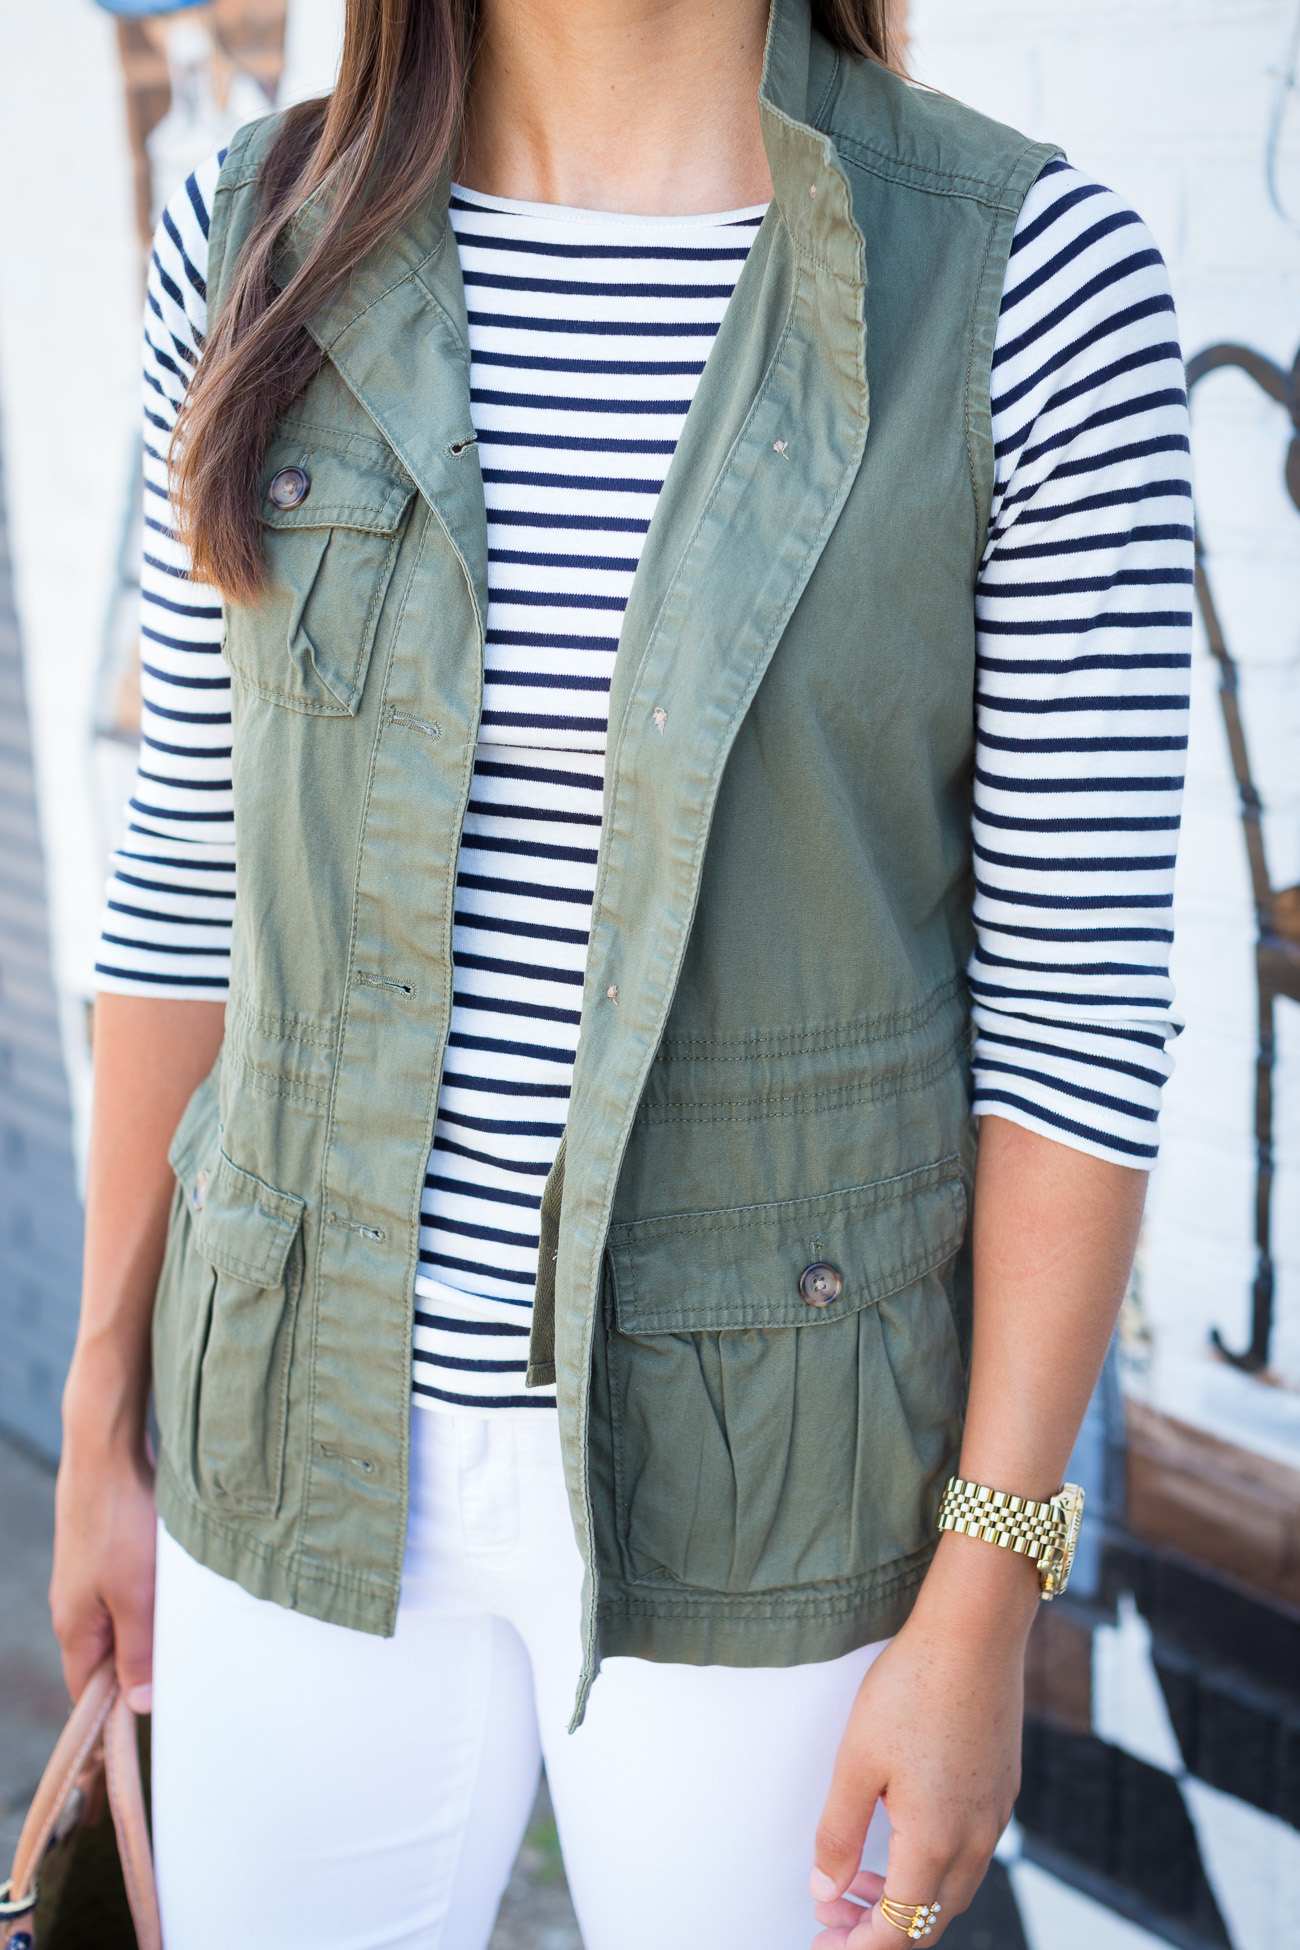 Utility Vest and Stripe Tee // A Southern Drawl